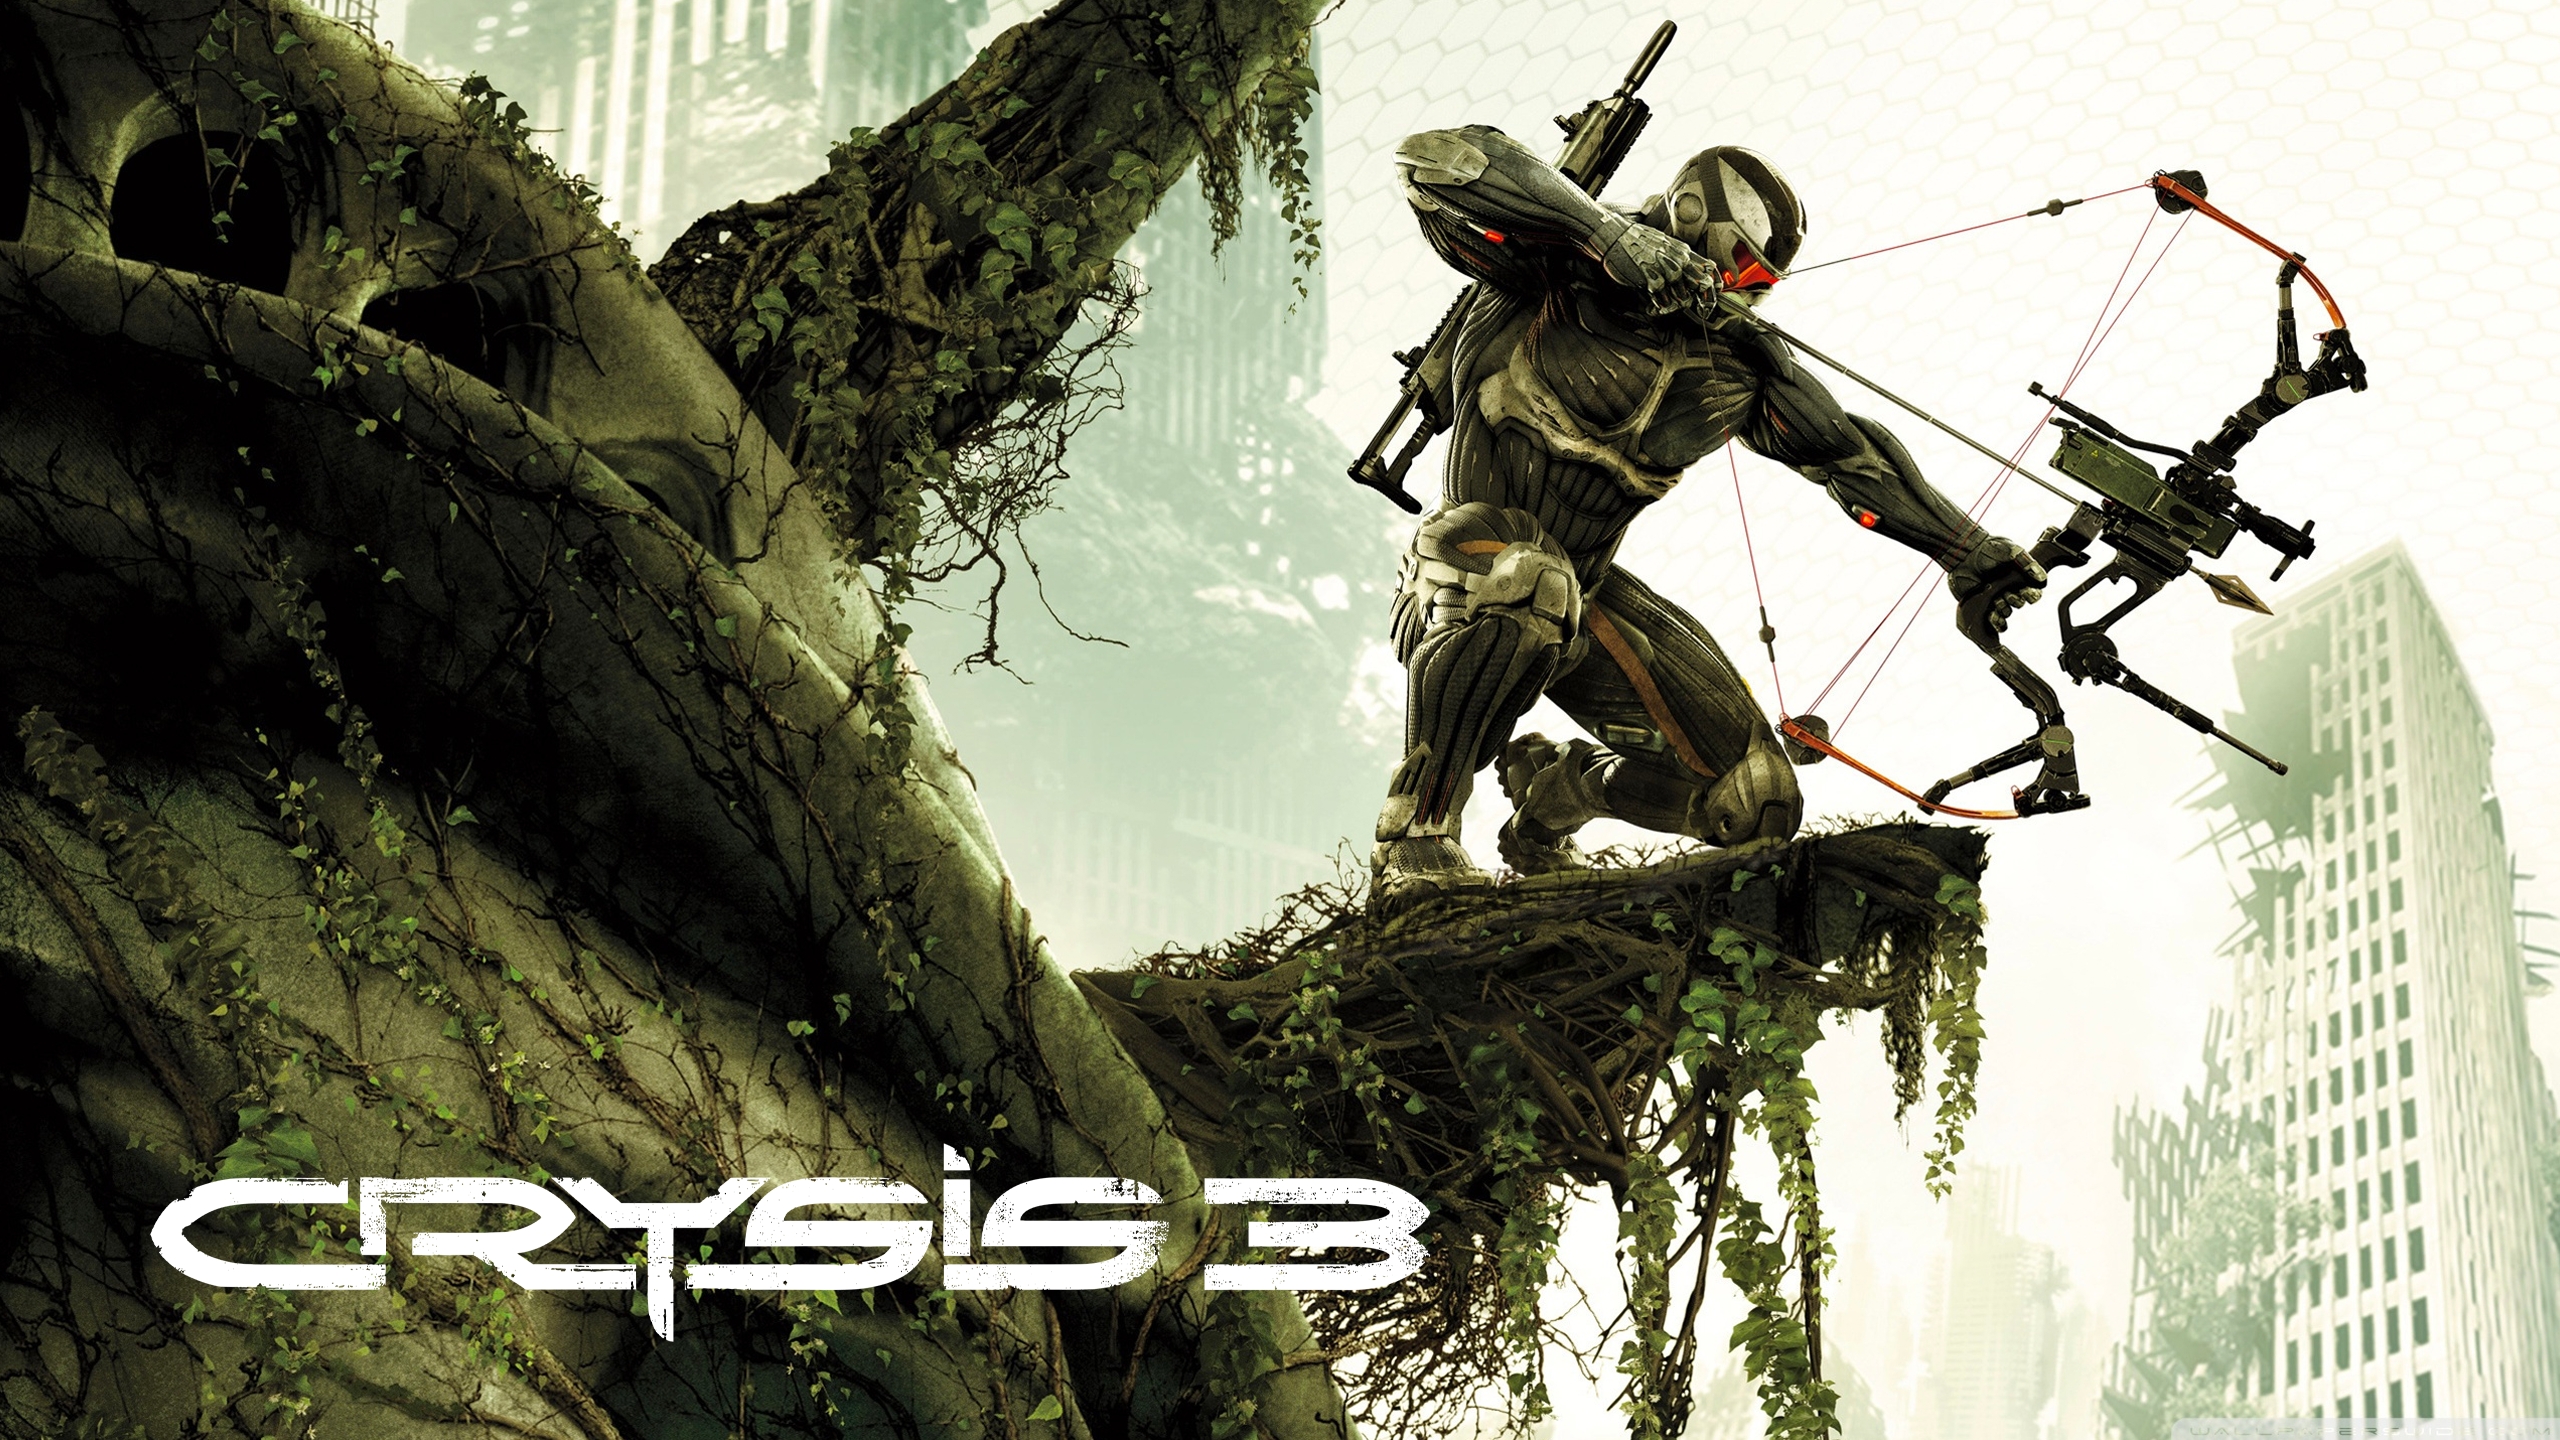 crysis 3 remastered steam download